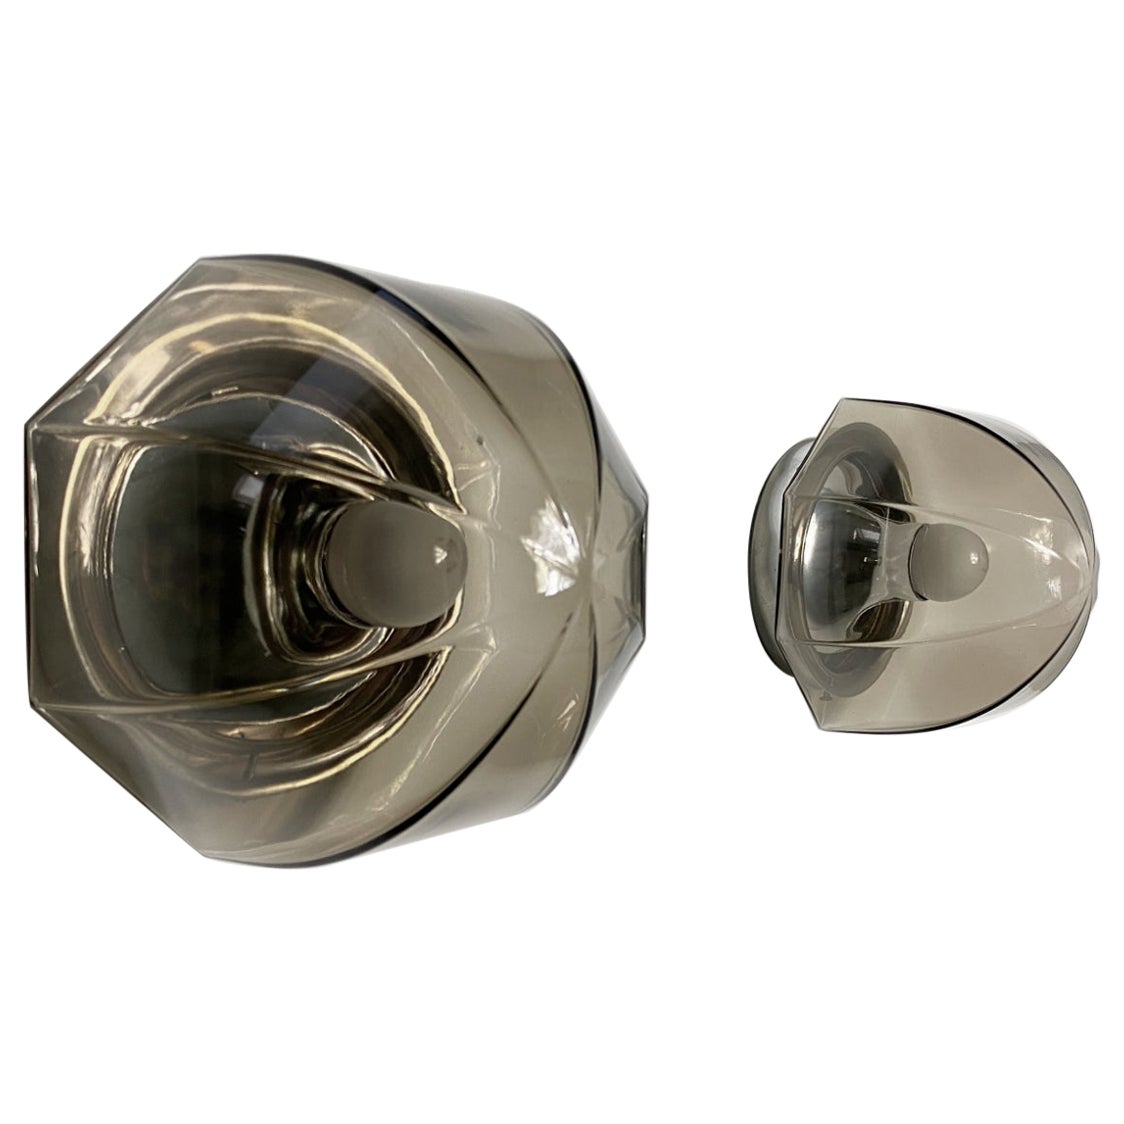 Hillebrand Chrome & Smoked Glass Sconce Flush Mount Lights, 1970s, Germany For Sale